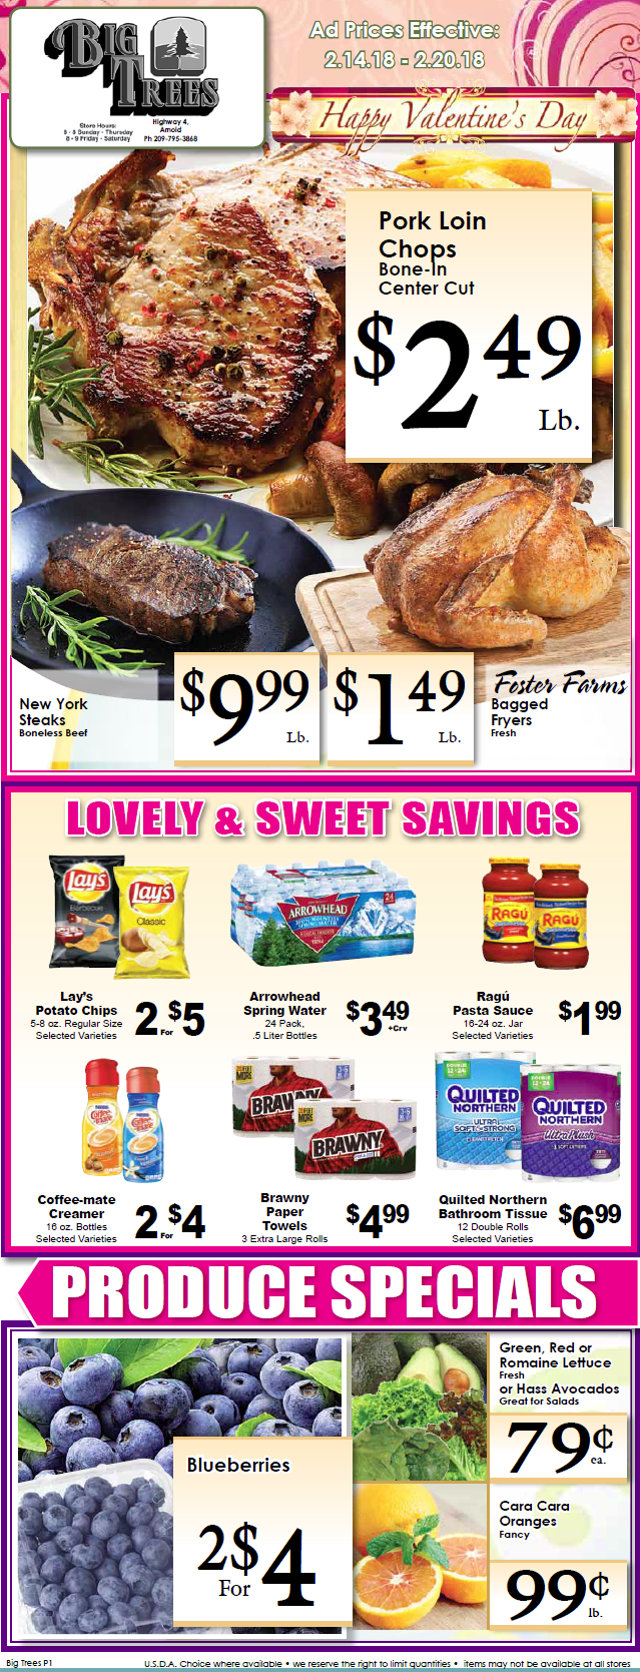 Big Trees Market Weekly Ad & Specials Through February 20th